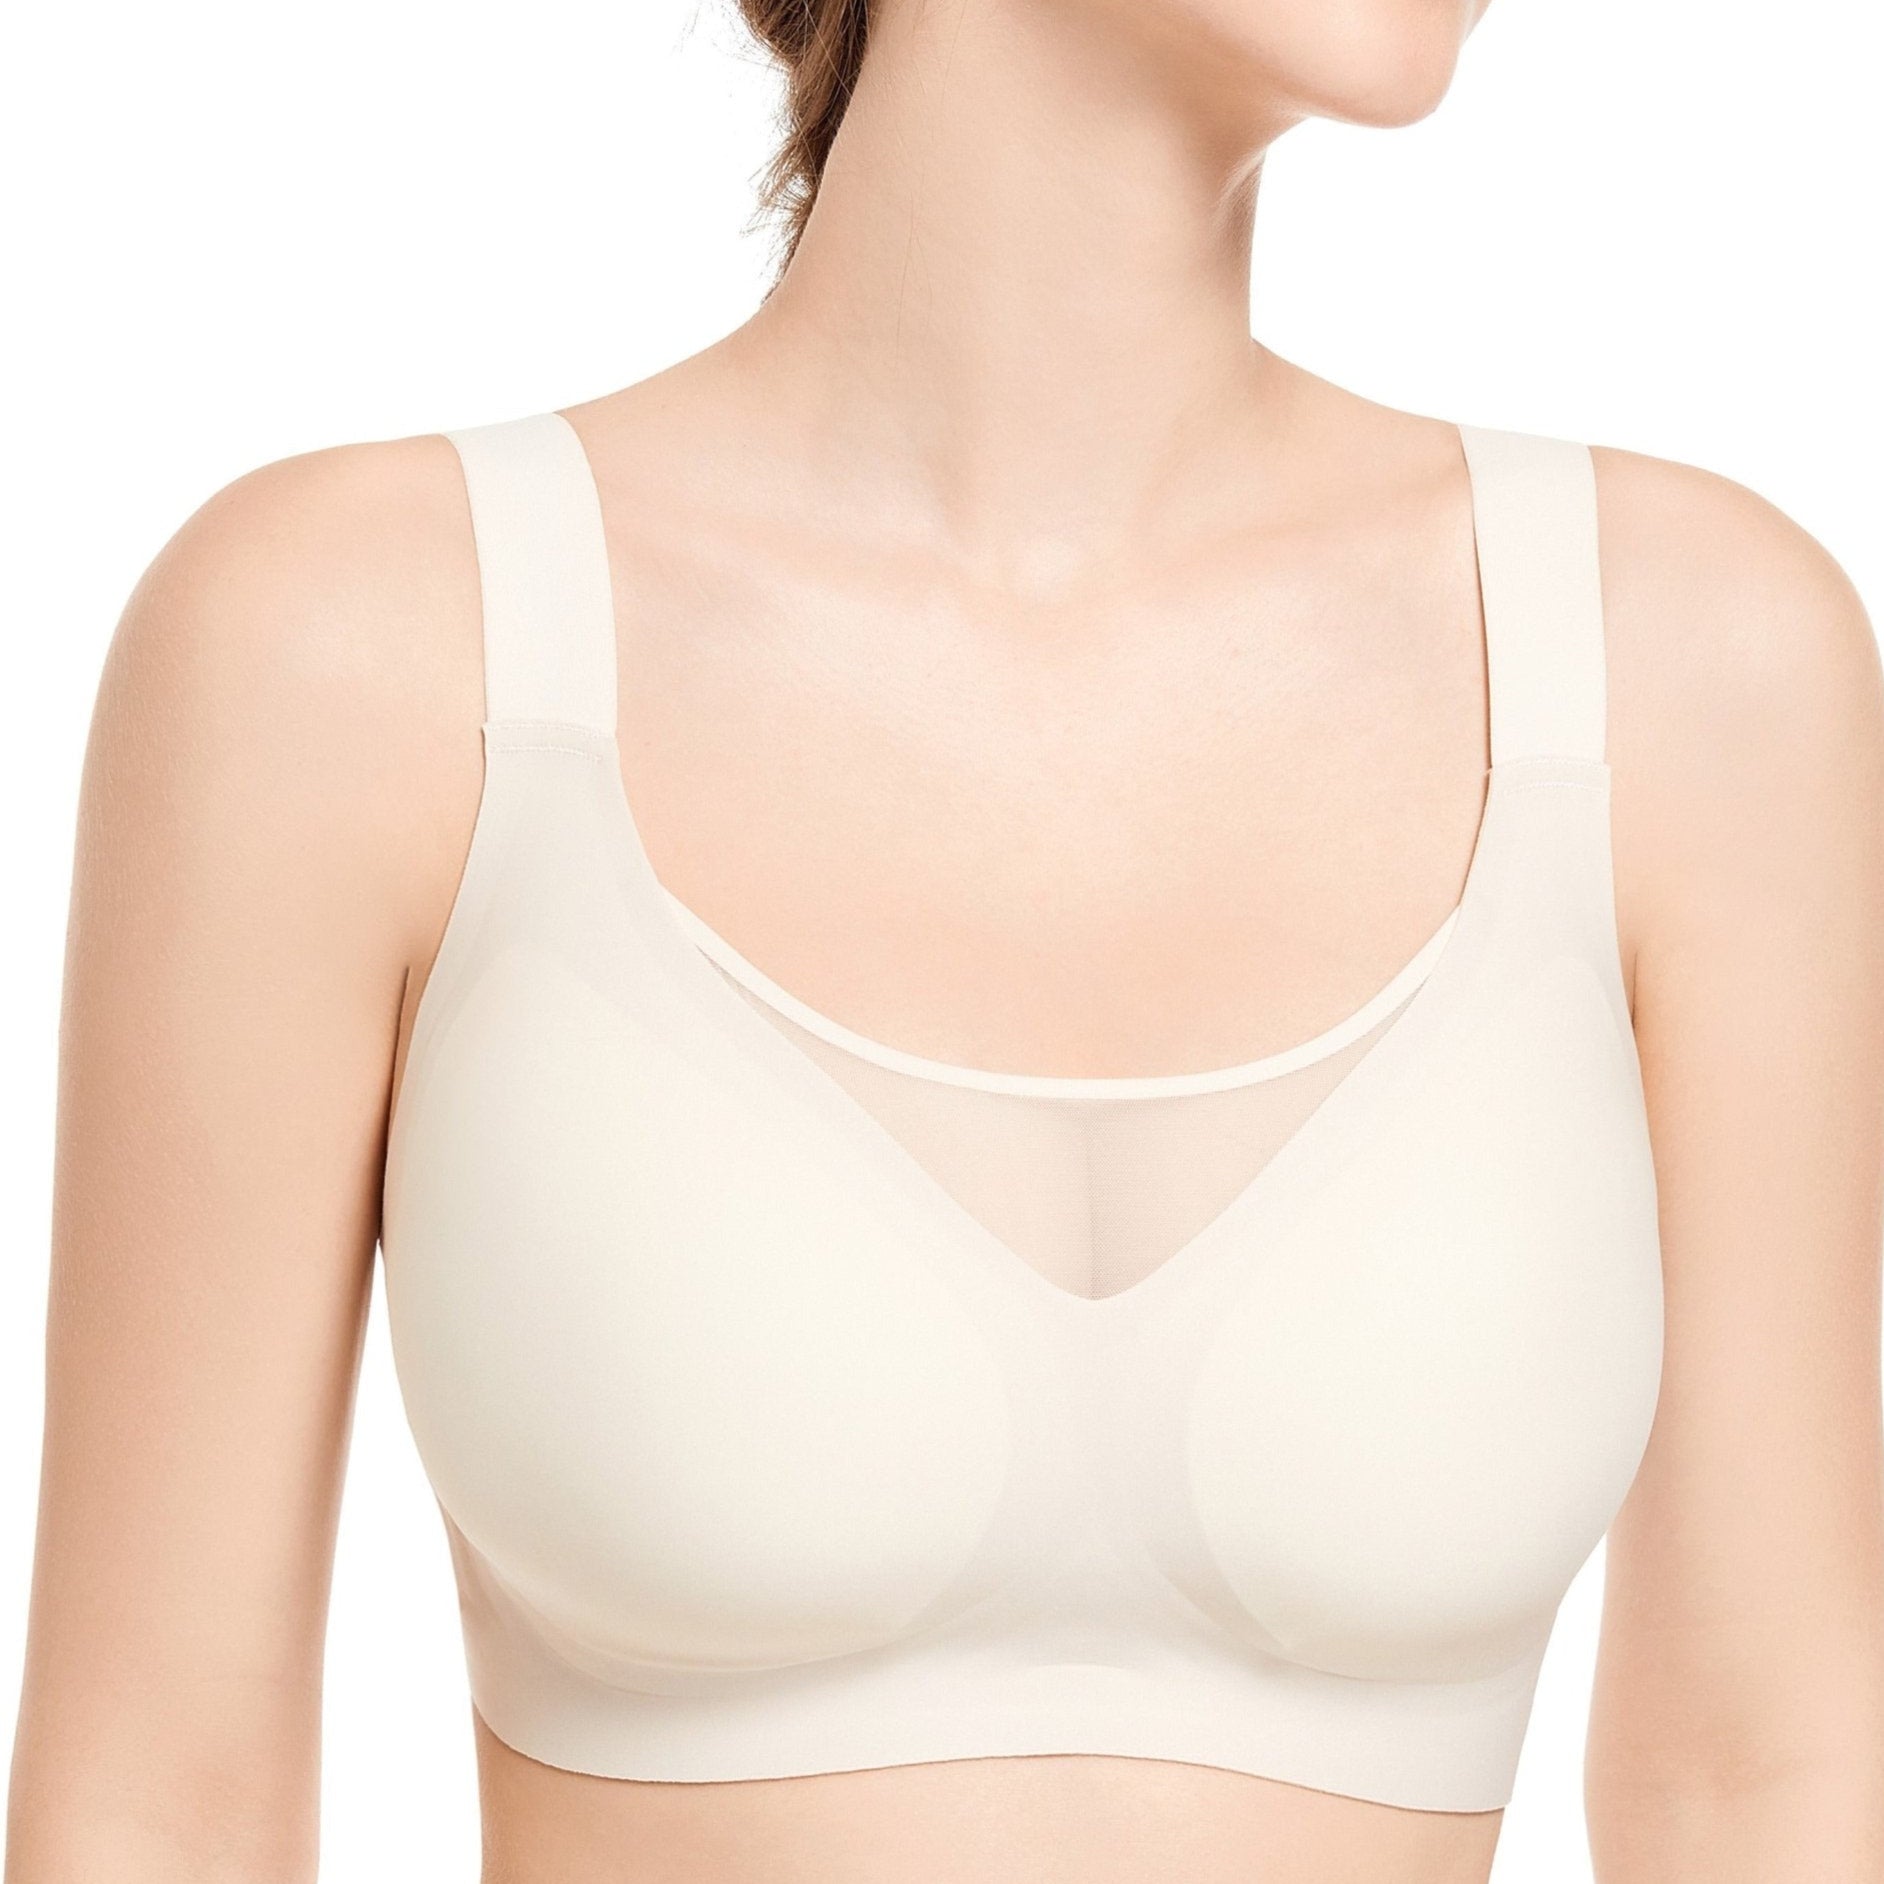 Experience The Comfort of Freedom - The Best Choice for A Wireless Bra